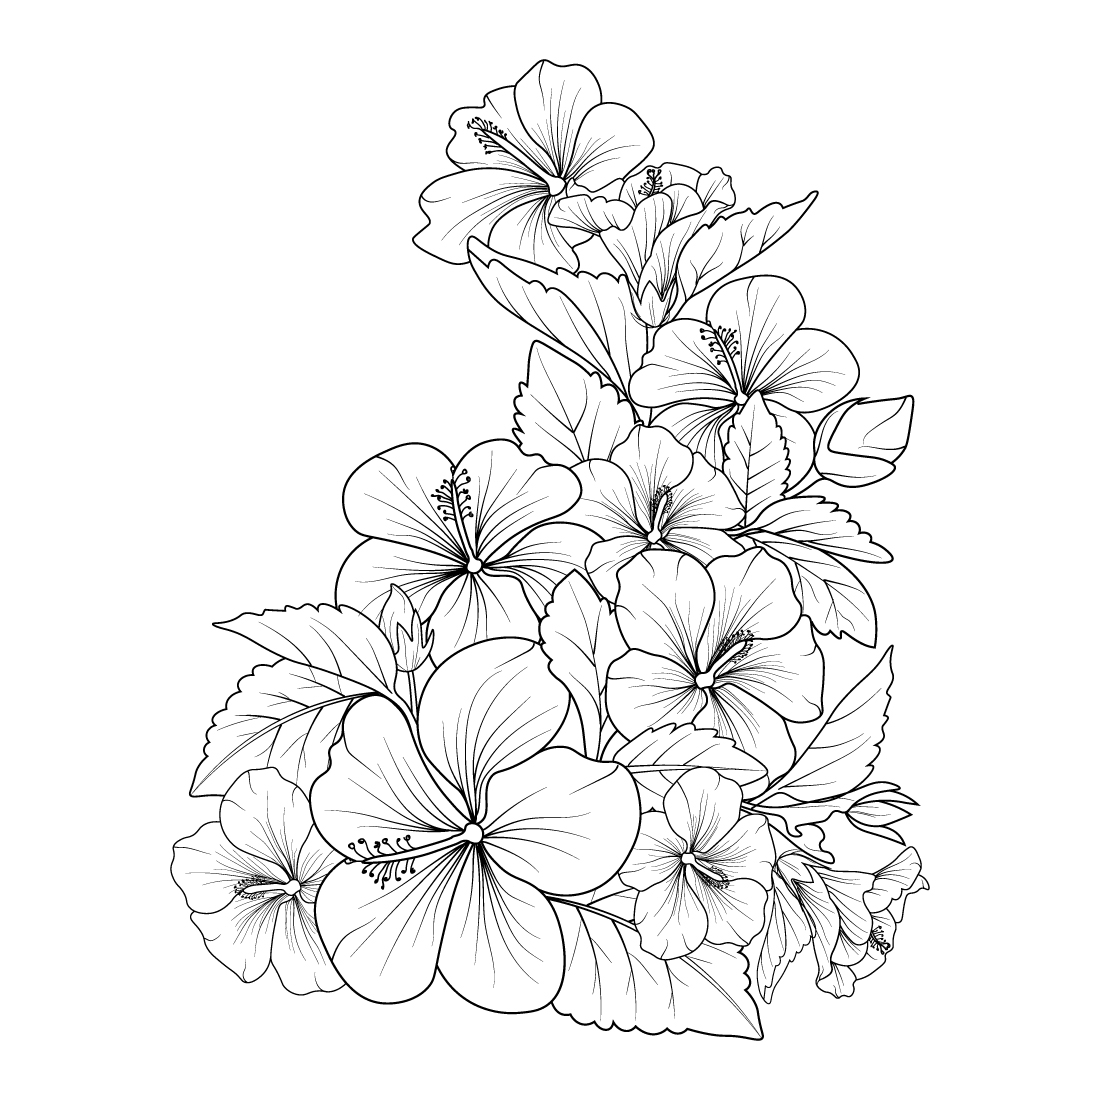 Hibiscus flowers illustration coloring page, simplicity, Embellishment, monochrome, rose vector art, cover image.